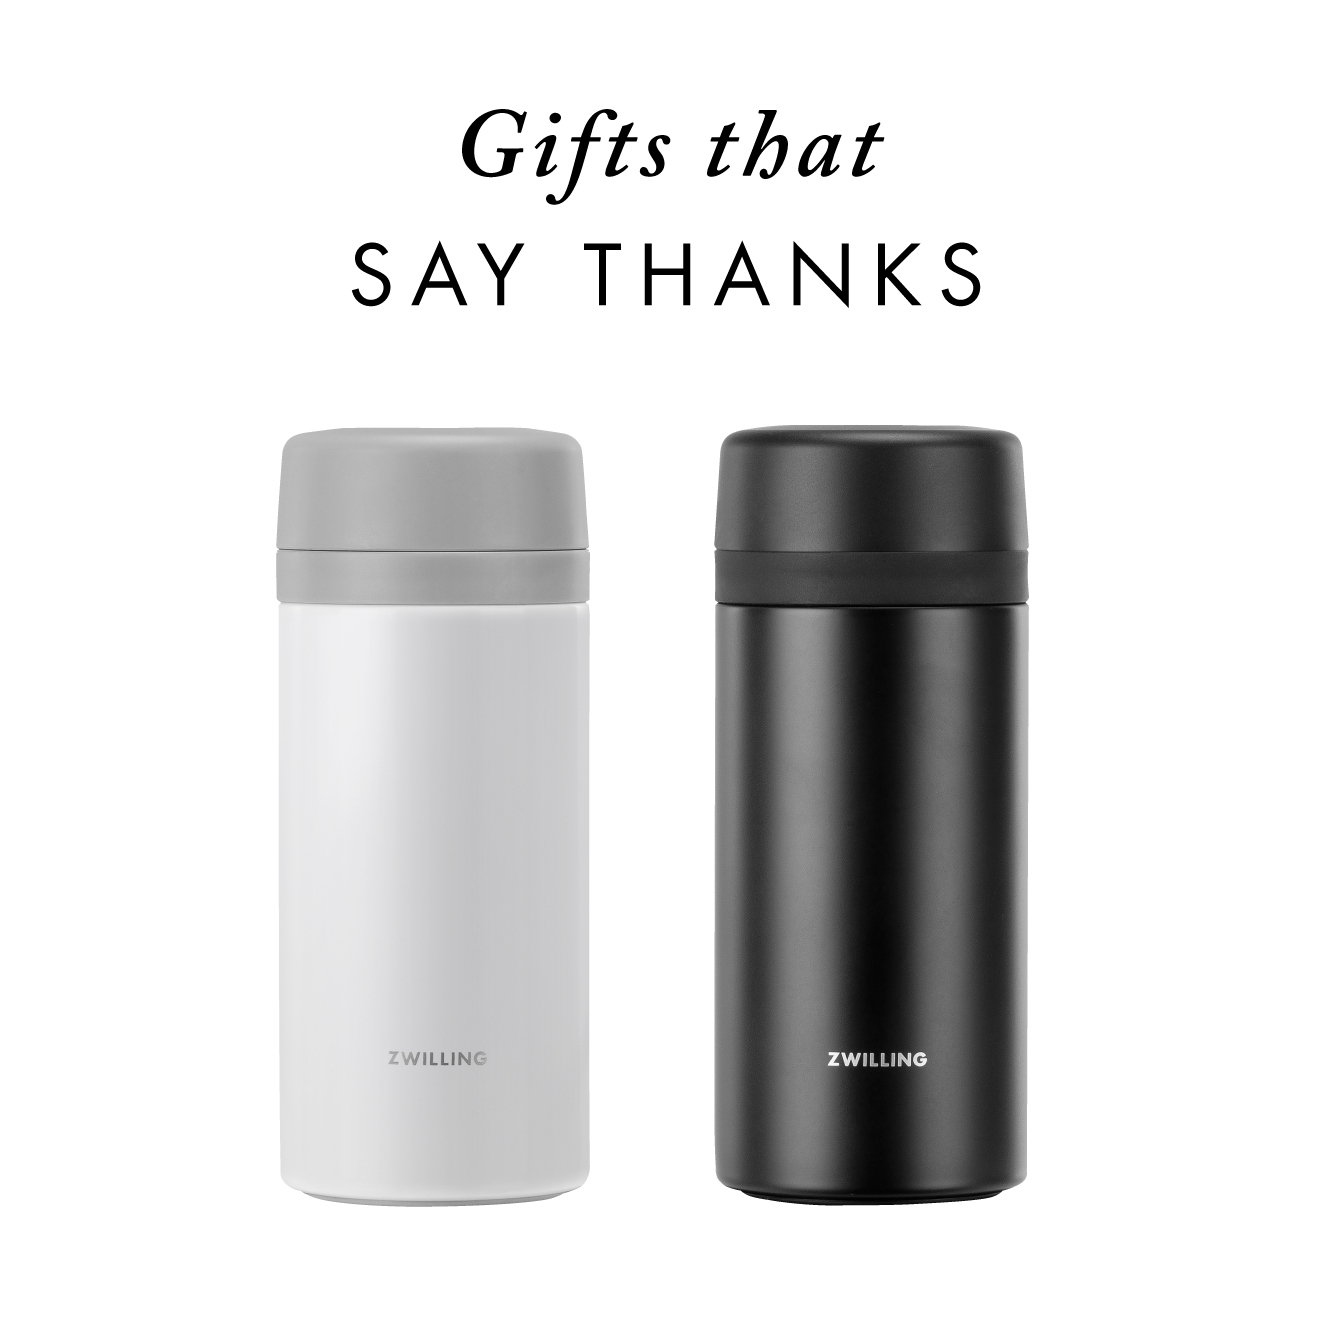 Gifts that say Thanks